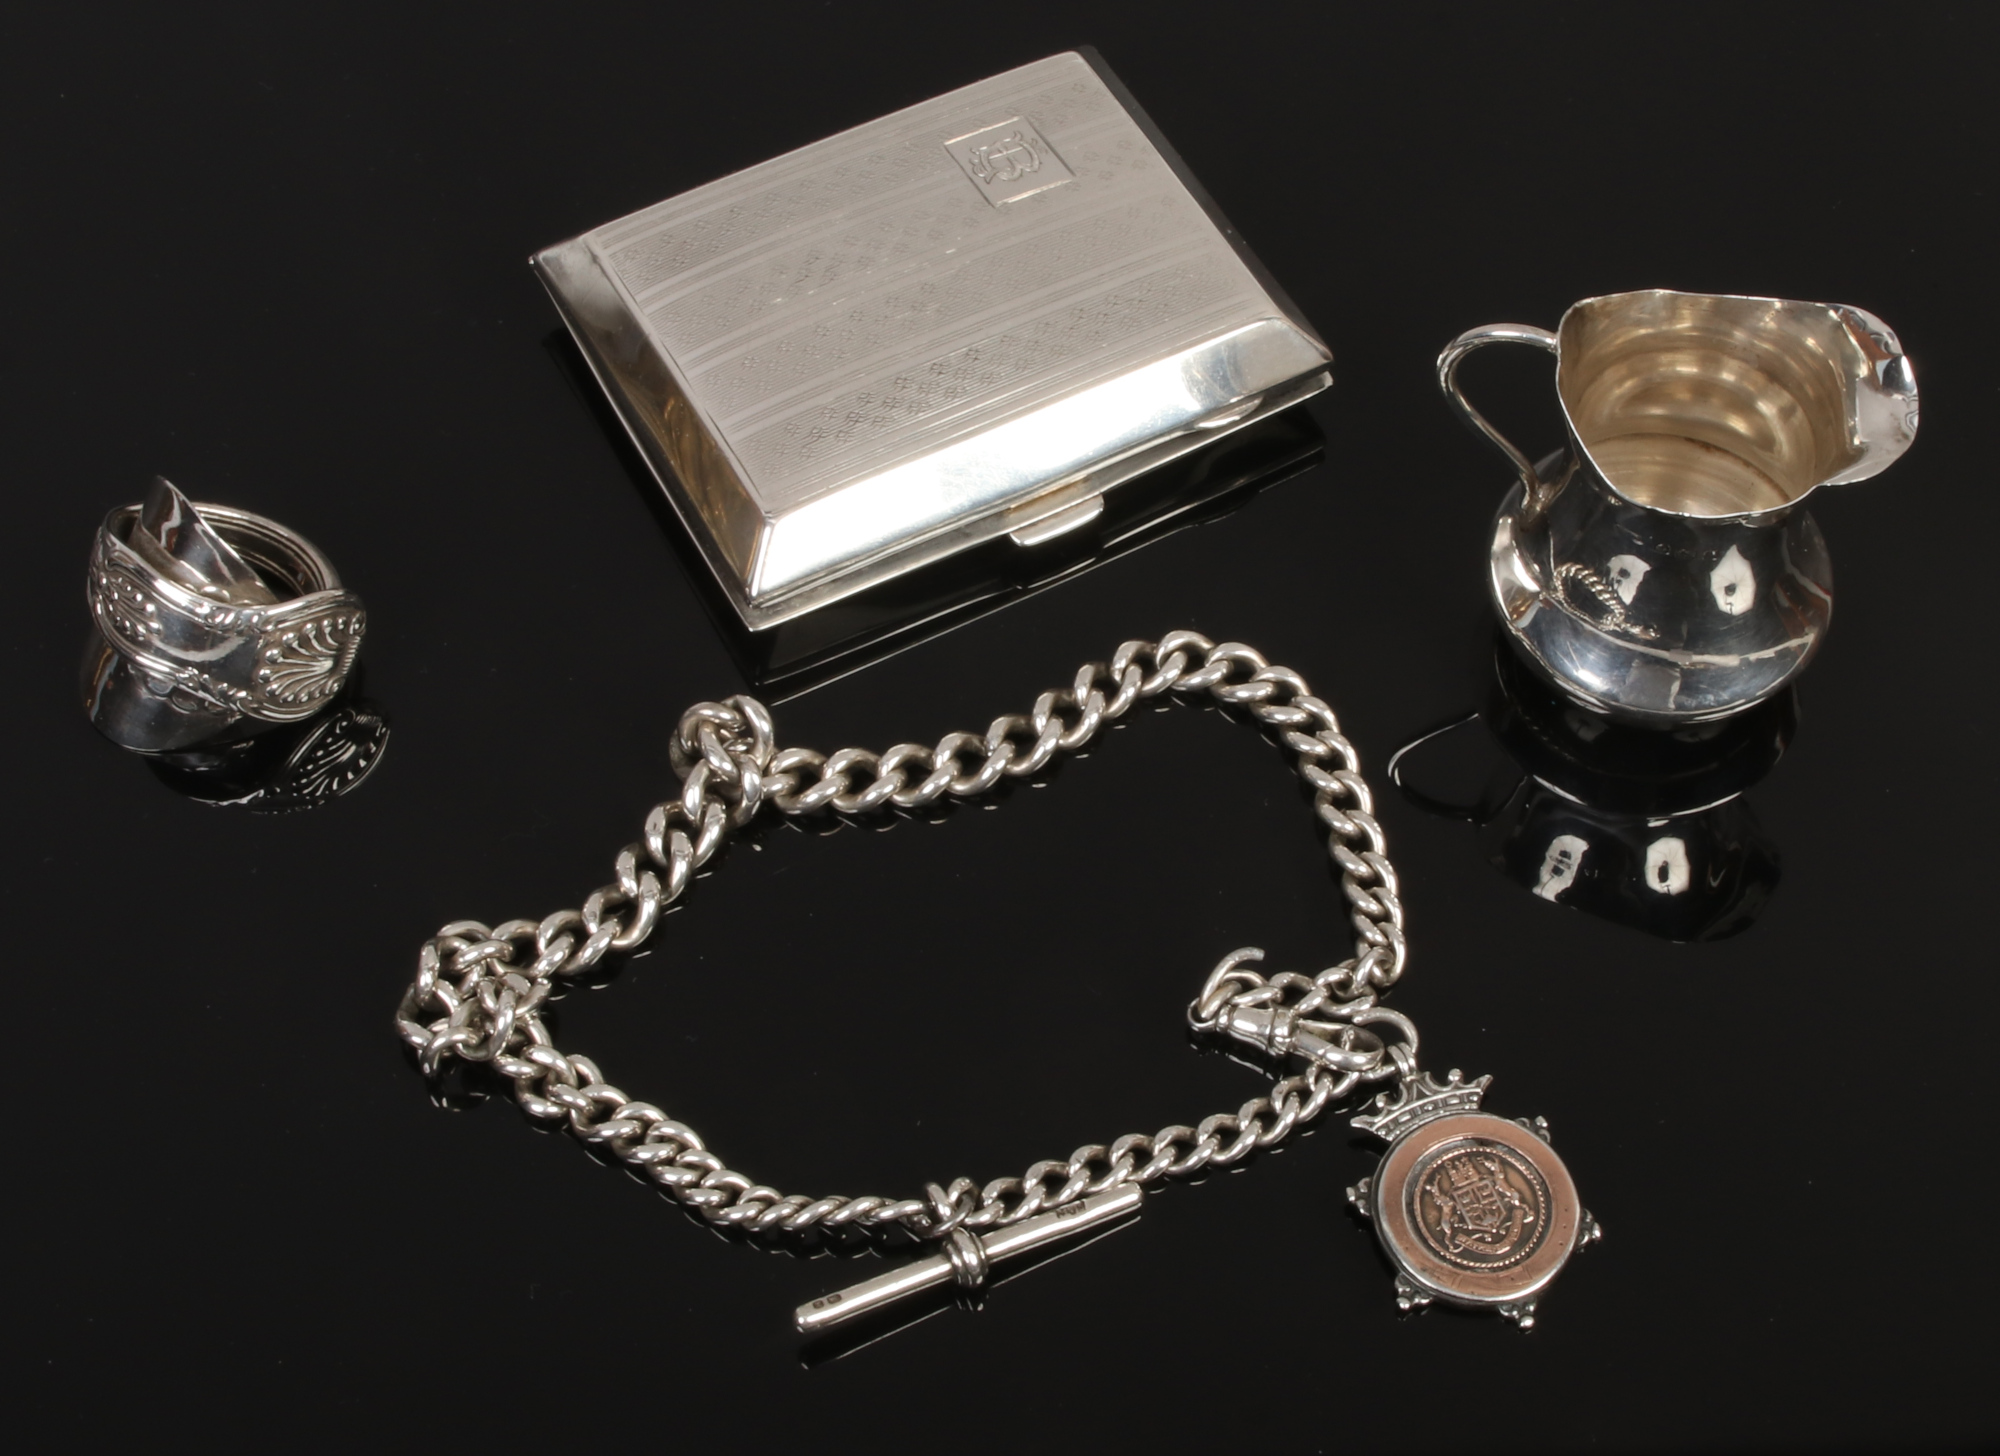 An Edwardian silver miniature cream jug, engraved cigarette case, Kings pattern spoon ring and a